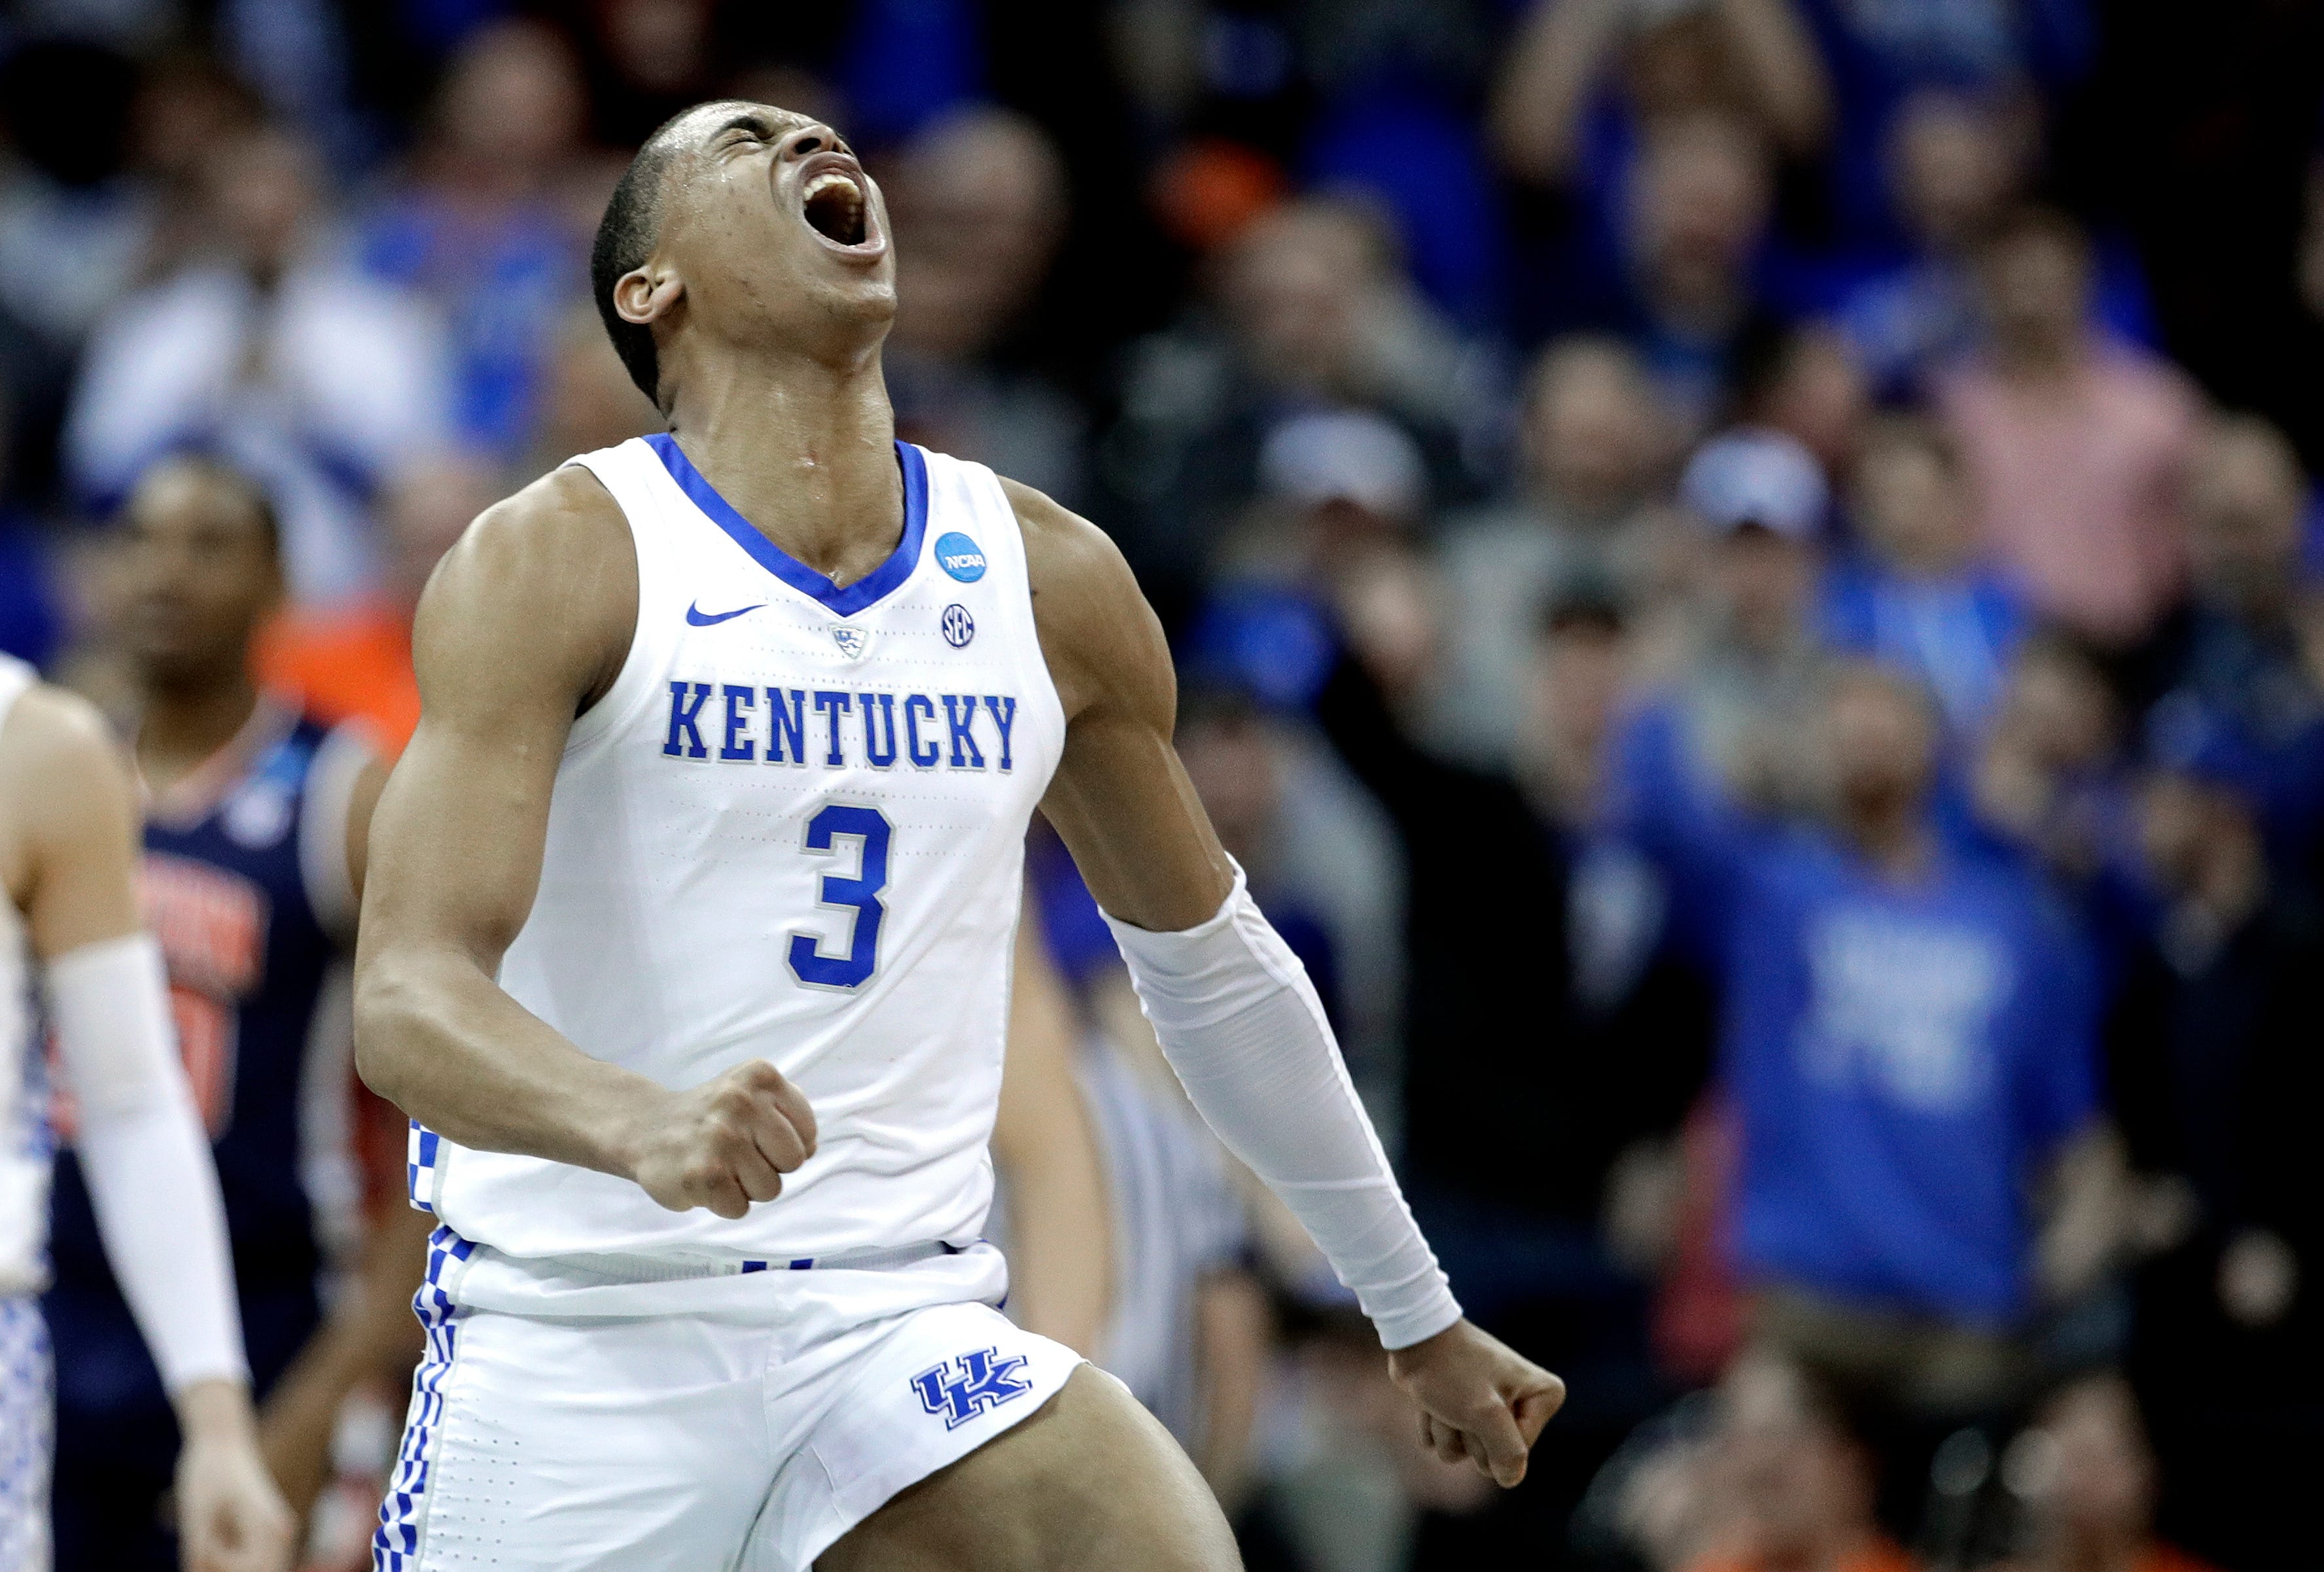 17. Brooklyn Nets: Keldon Johnson, wing, Kentucky. According to reports, the Nets are trading this pick to the Hawks in a deal to involving Taurean Prince and Allen Crabbe. If that’s the case, it would be a good draft haul for the Hawks, who get a nice two-way, versatile piece for their wing corps.